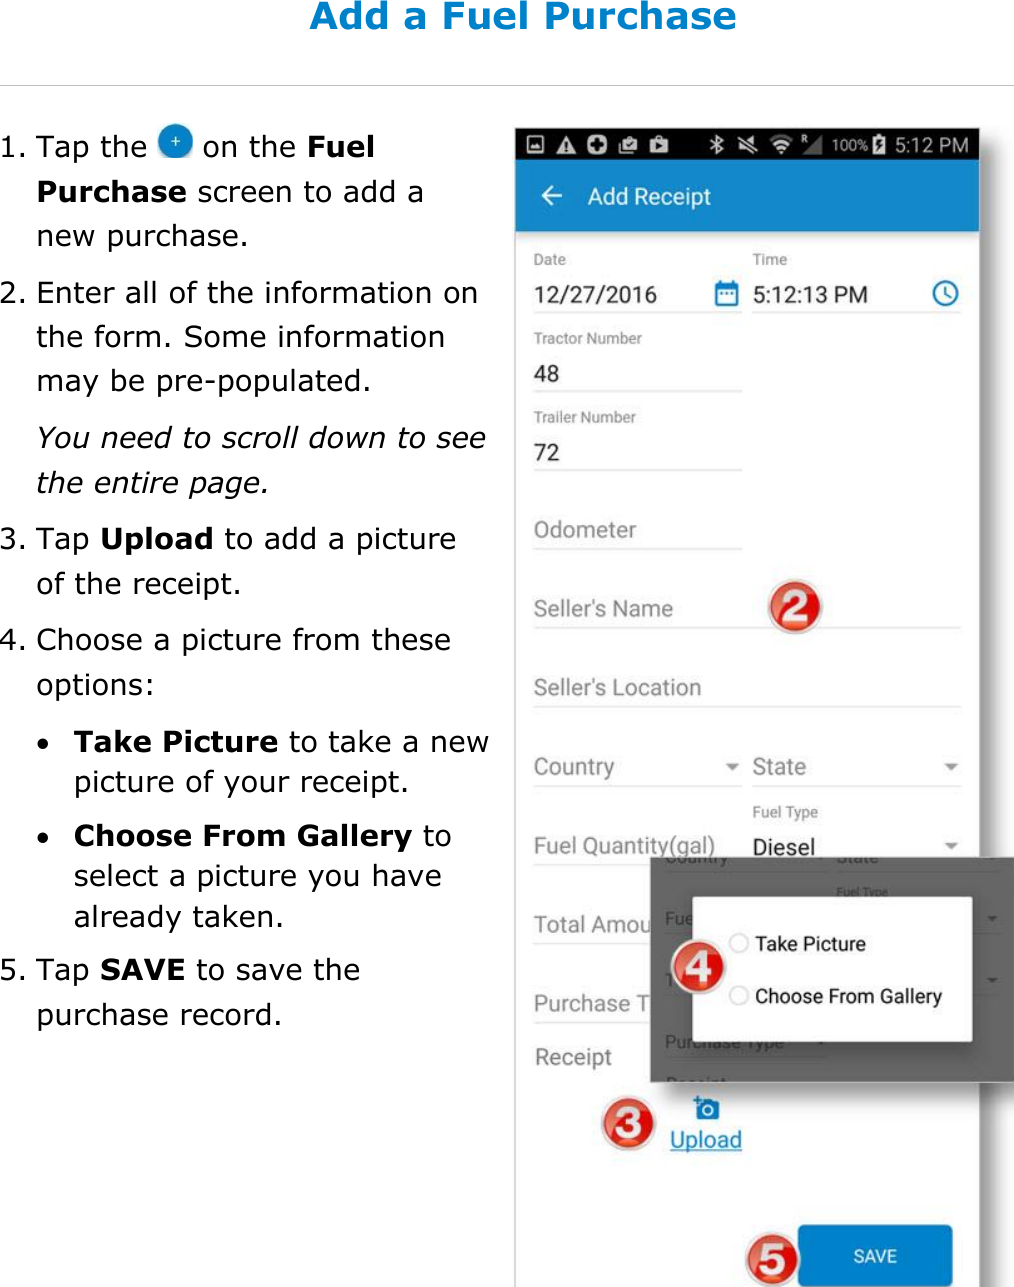 Manage Fuel Purchases DriverConnect User Guide  66 © 2017, Rand McNally, Inc. Add a Fuel Purchase 1. Tap the   on the Fuel Purchase screen to add a new purchase. 2. Enter all of the information on the form. Some information may be pre-populated. You need to scroll down to see the entire page. 3. Tap Upload to add a picture of the receipt. 4. Choose a picture from these options:  Take Picture to take a new picture of your receipt.  Choose From Gallery to select a picture you have already taken. 5. Tap SAVE to save the purchase record.    